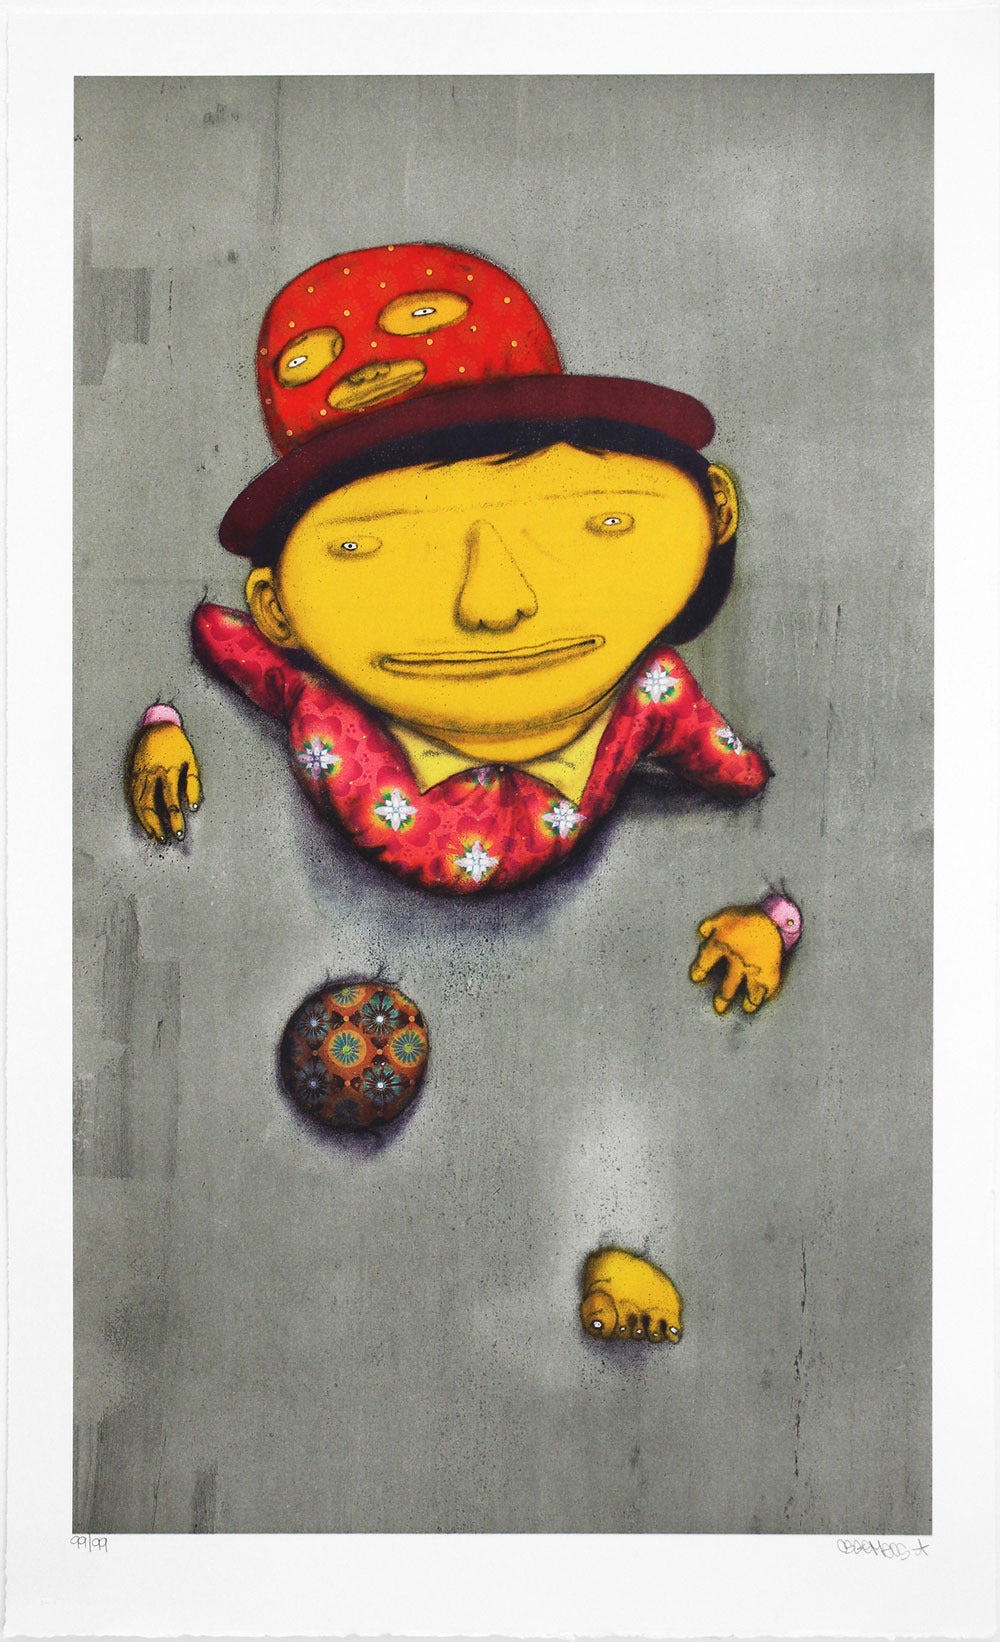 The Other Side - Print by Os Gêmeos